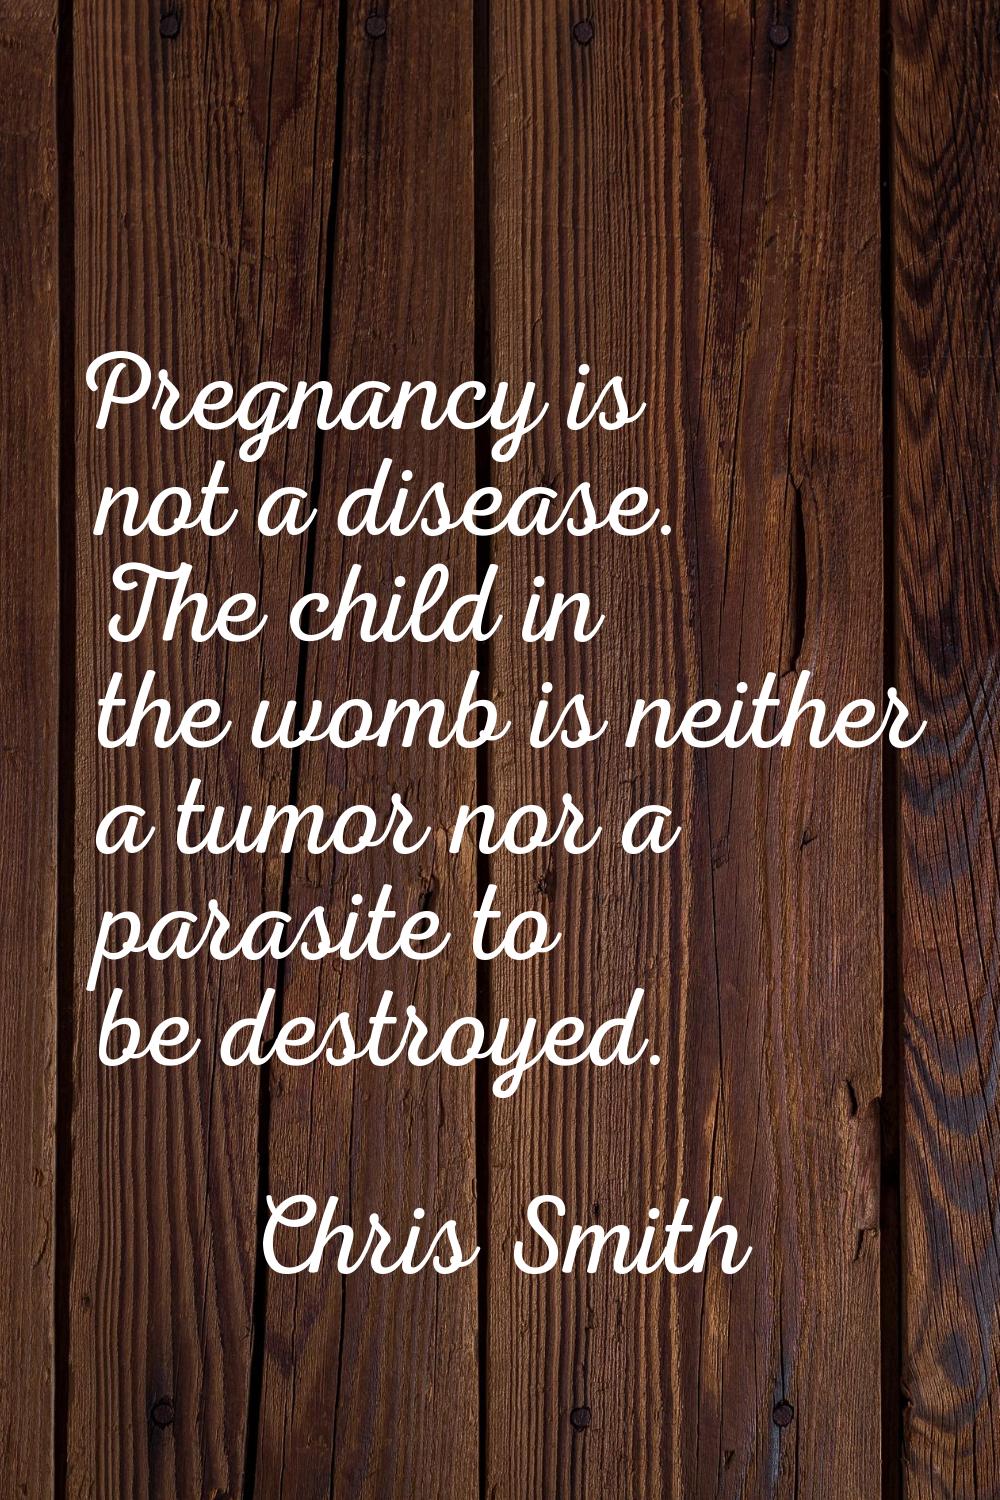 Pregnancy is not a disease. The child in the womb is neither a tumor nor a parasite to be destroyed